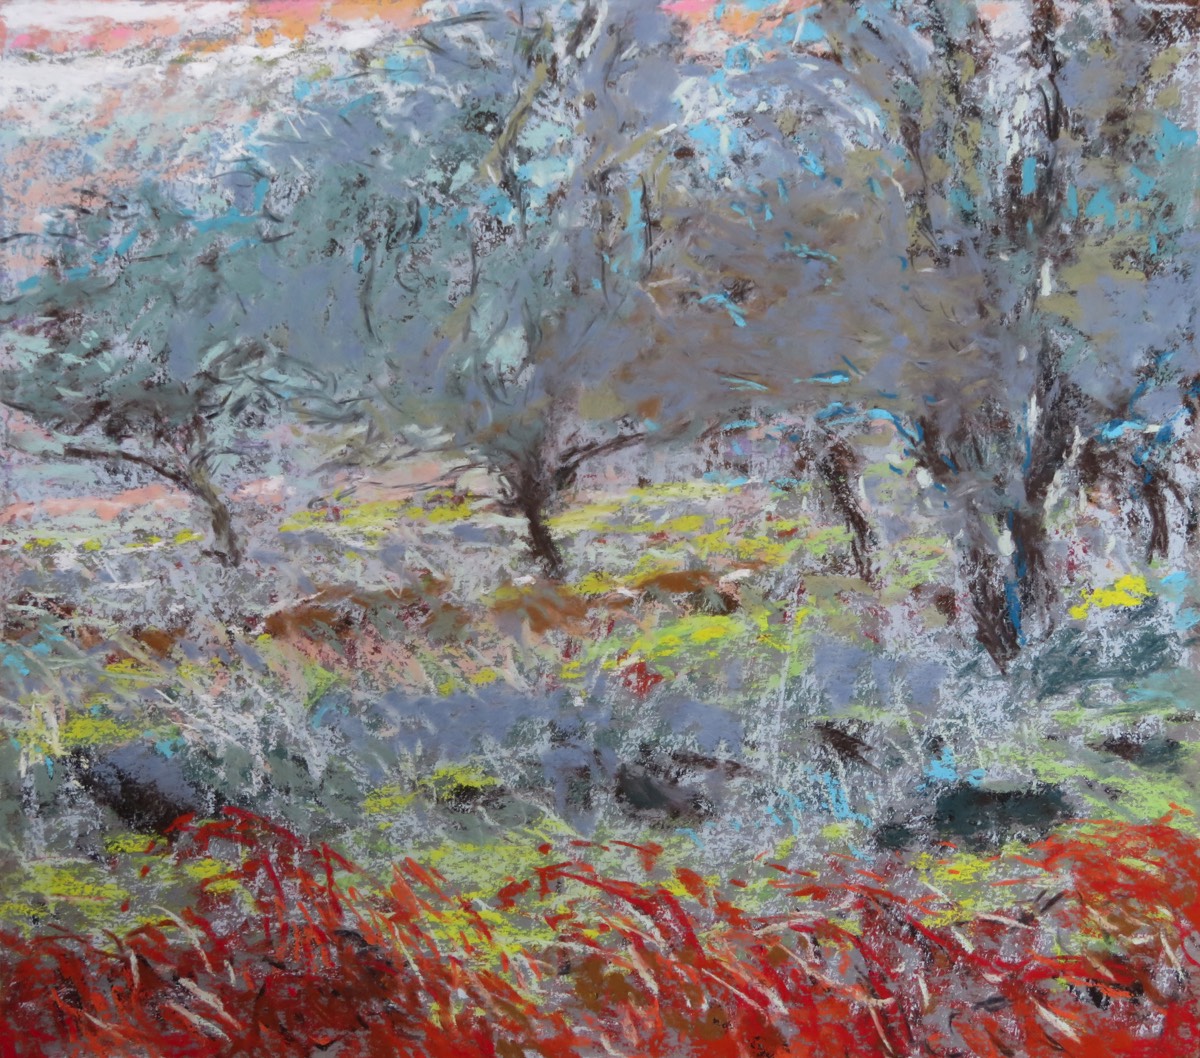 Blackthorn and Bracken on Black Law - Pastel 17.25 X 20 inches - Created 9th November 2020